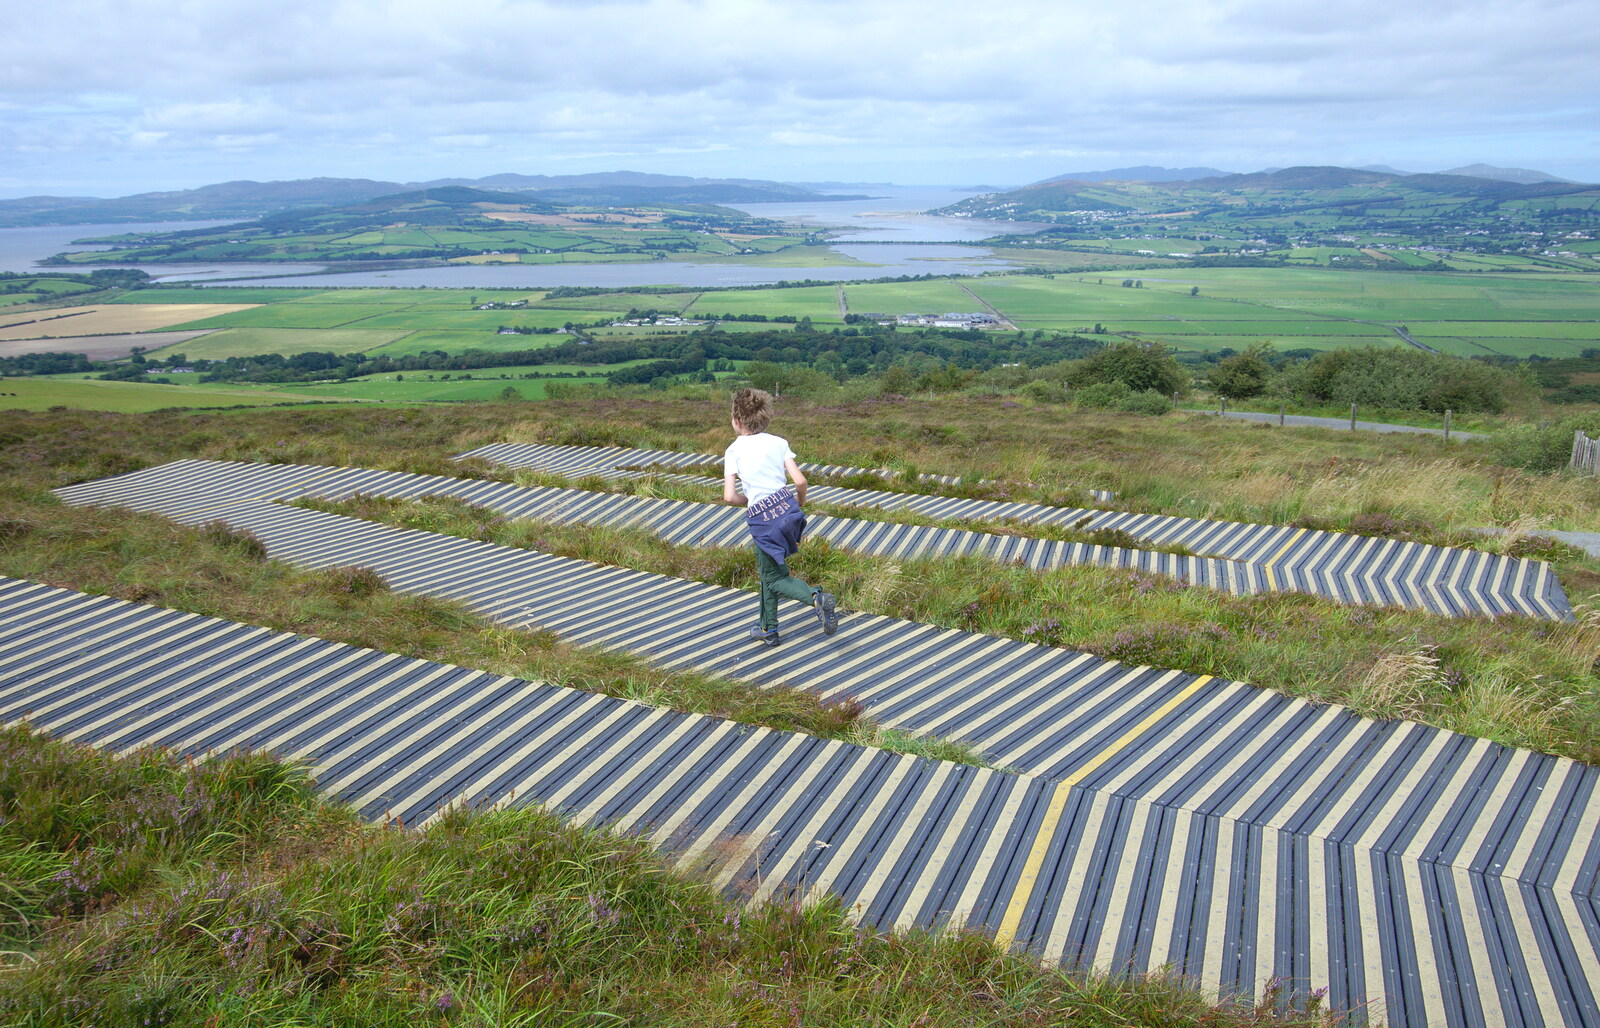 Fred runs down a boardwalk from A Day in Derry, County Londonderry, Northern Ireland - 15th August 2019